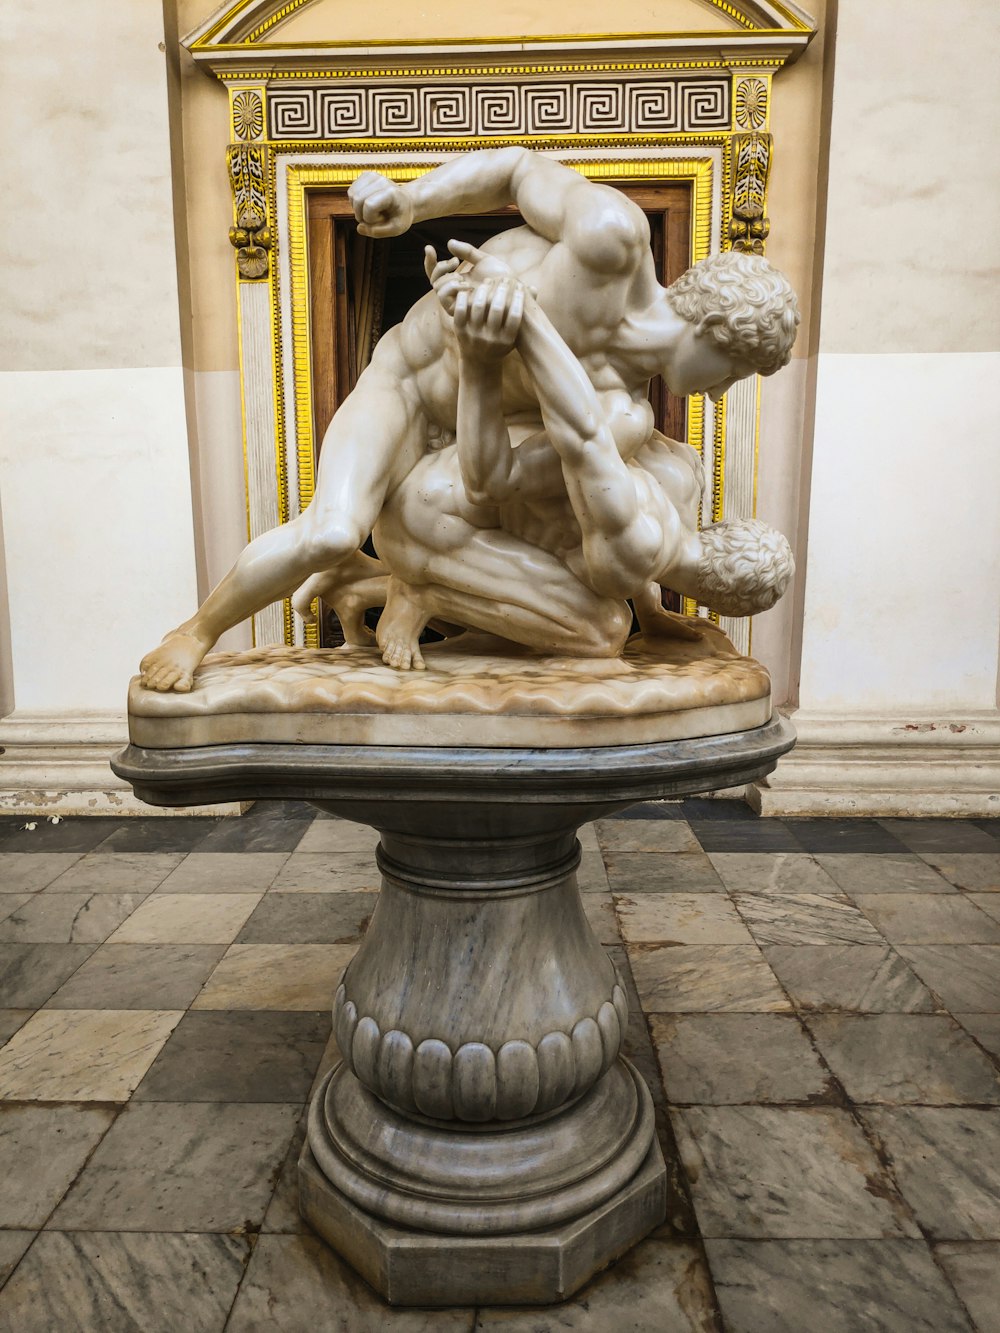 a statue of two men wrestling in a room